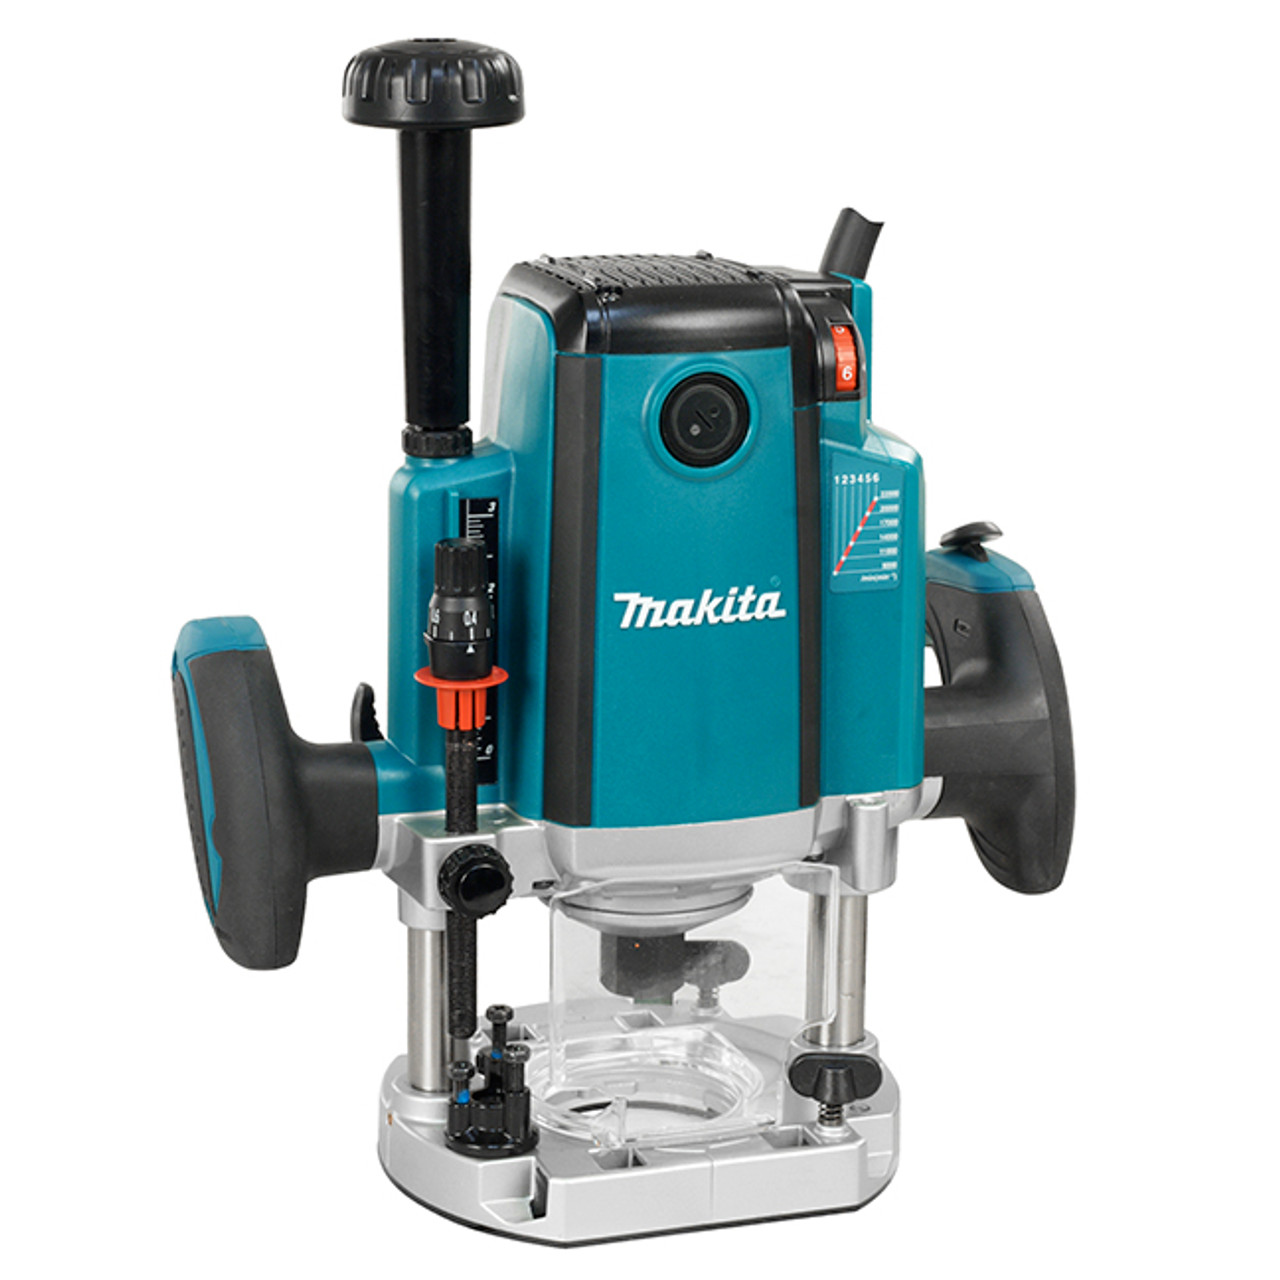 Makita RP2301FC 3-1/2 Plunge Router